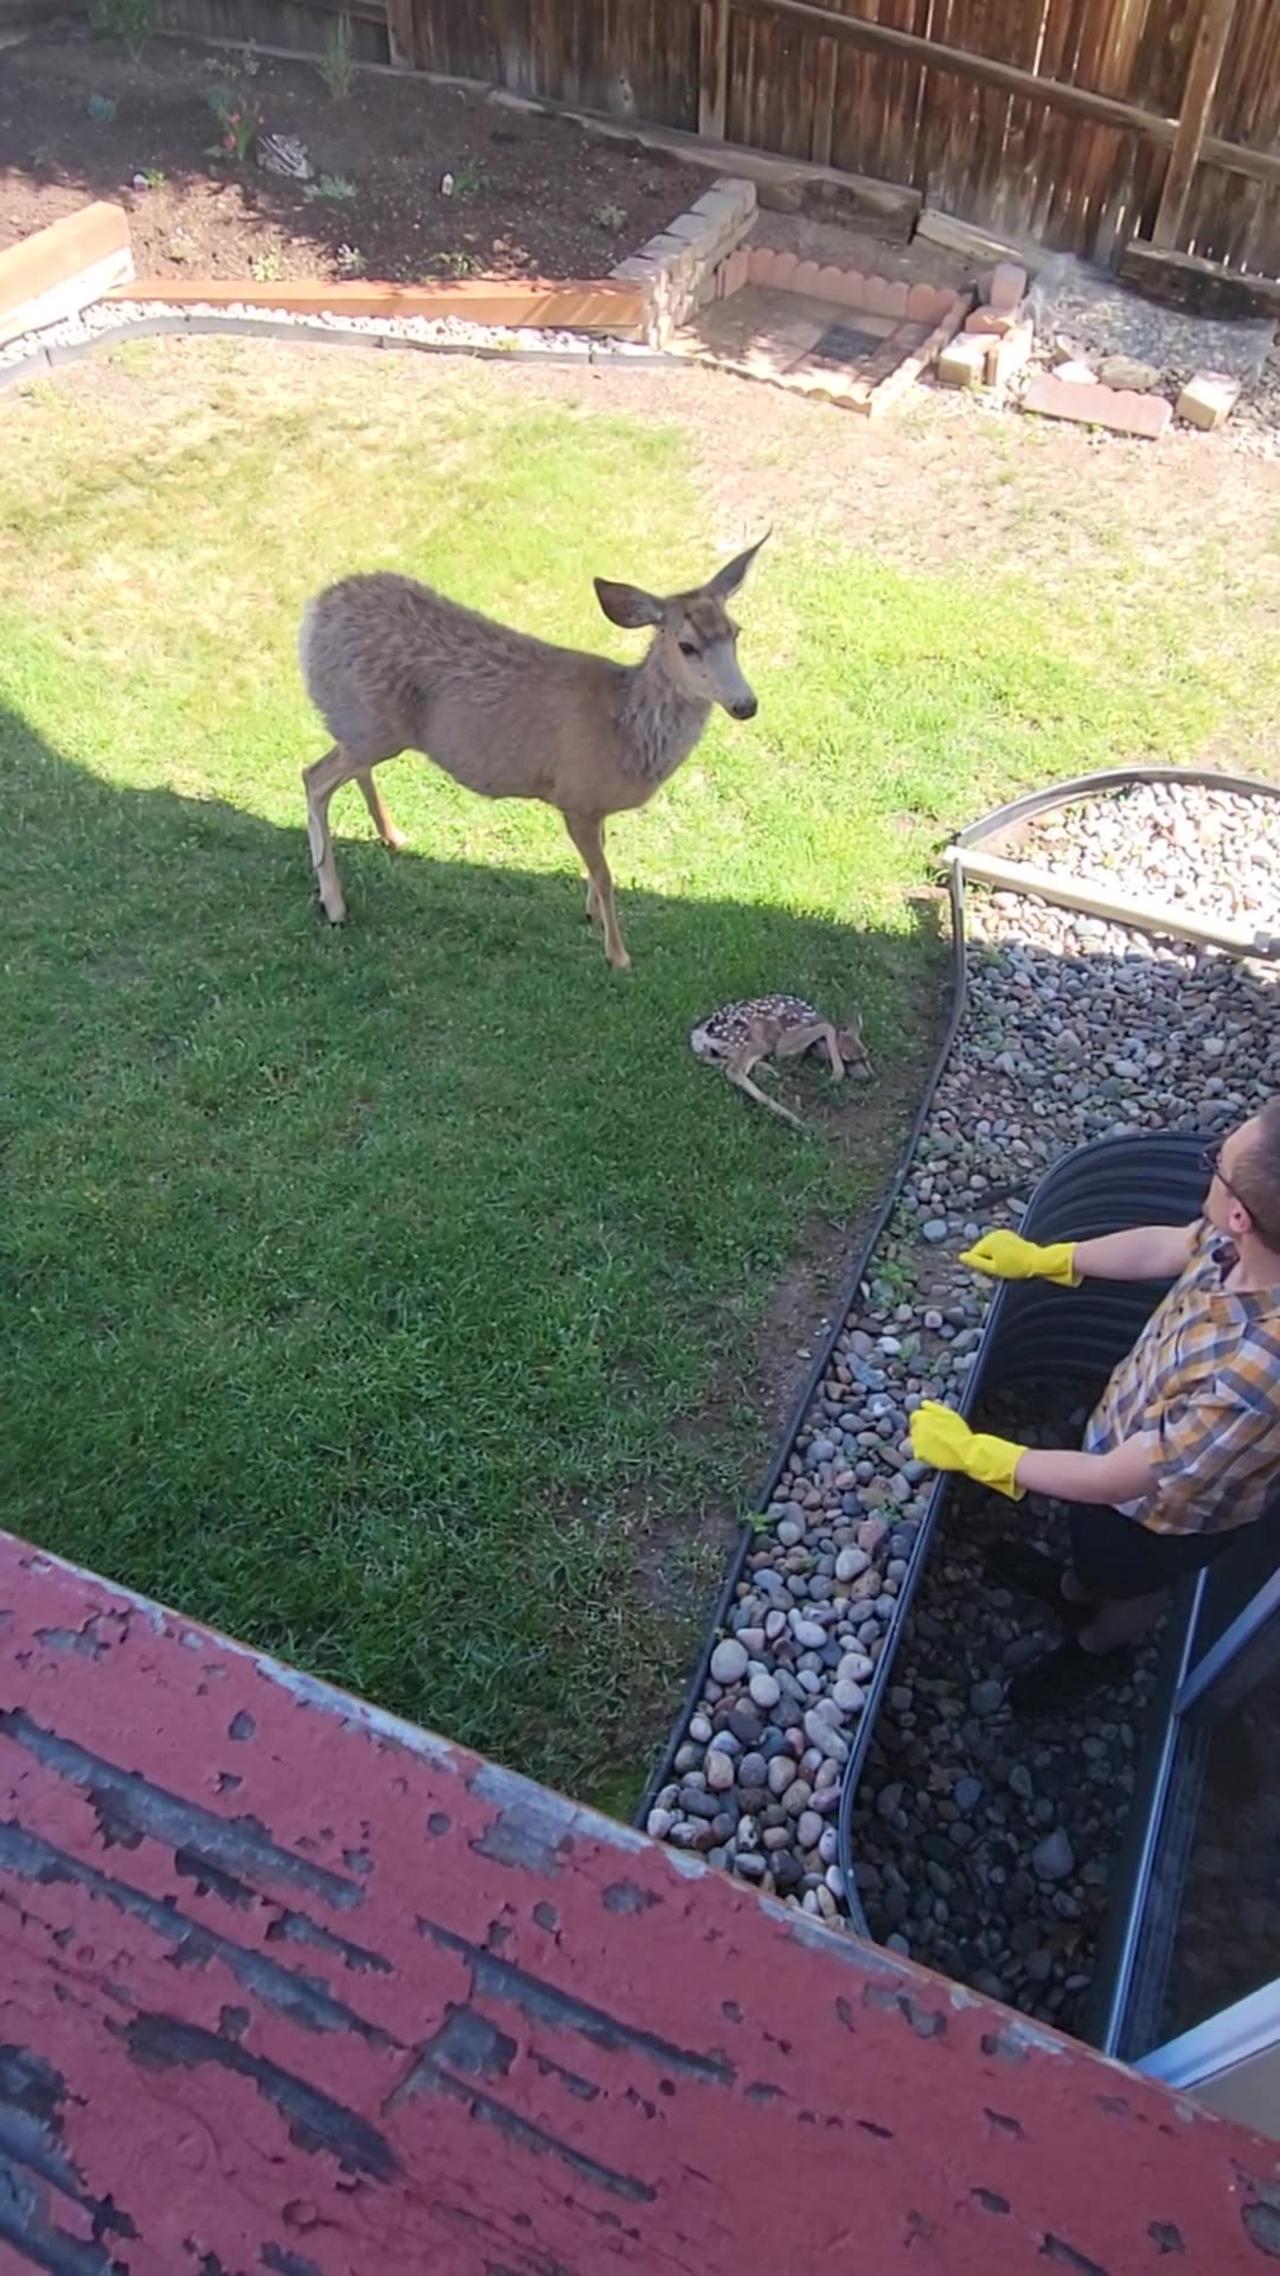 Man Rescues Fawn From Window Well